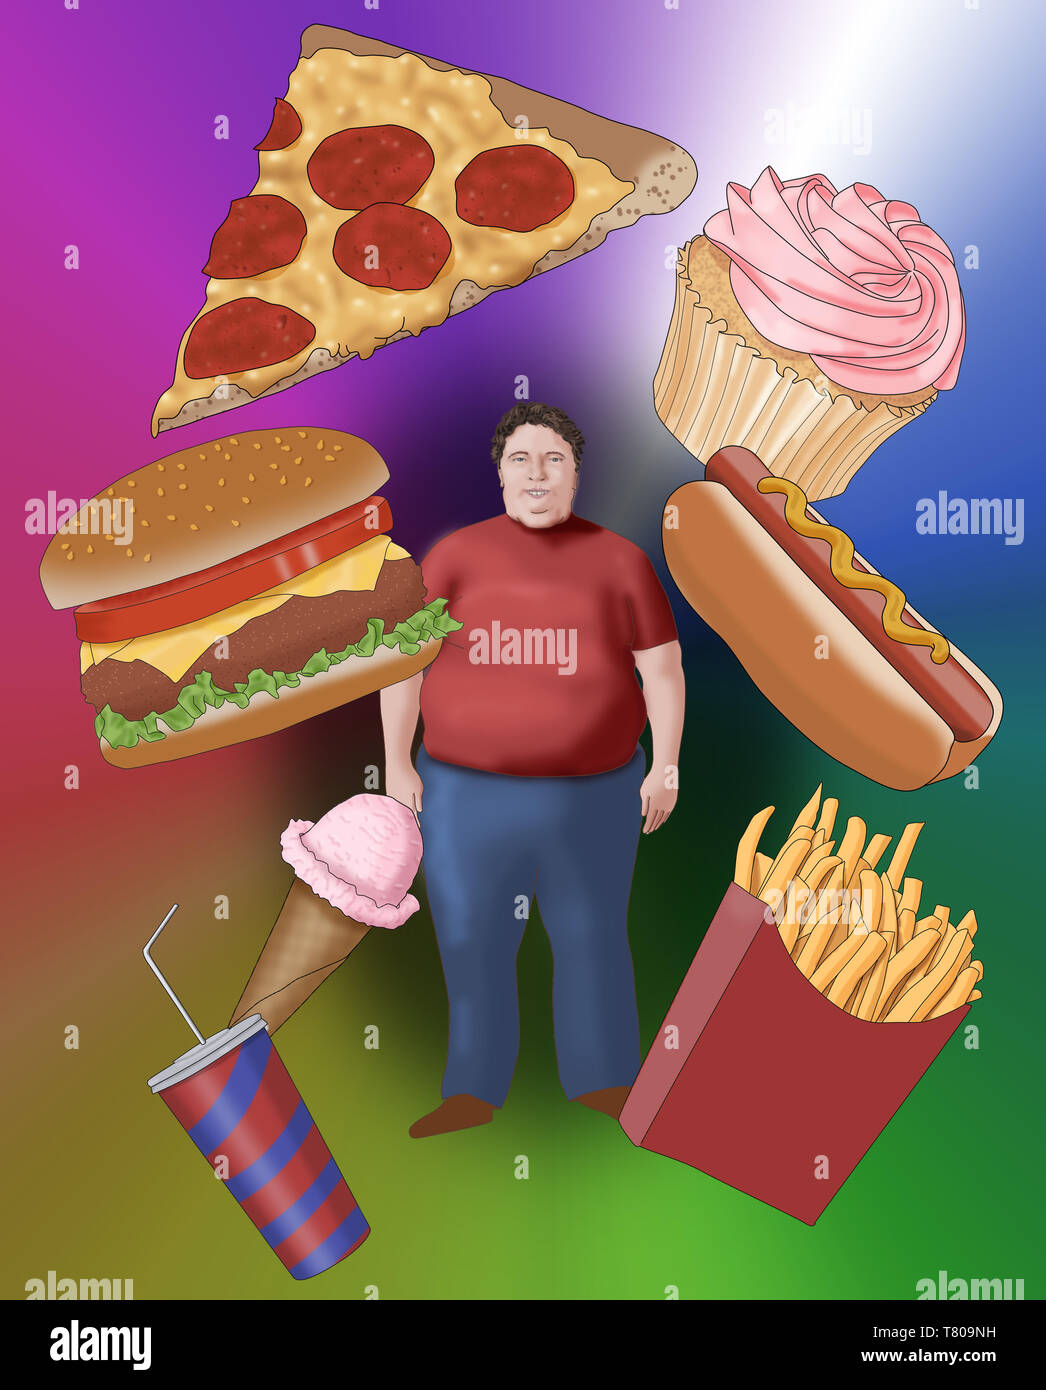 Obesity and Junk Food, Conceptual Illustration Stock Photo